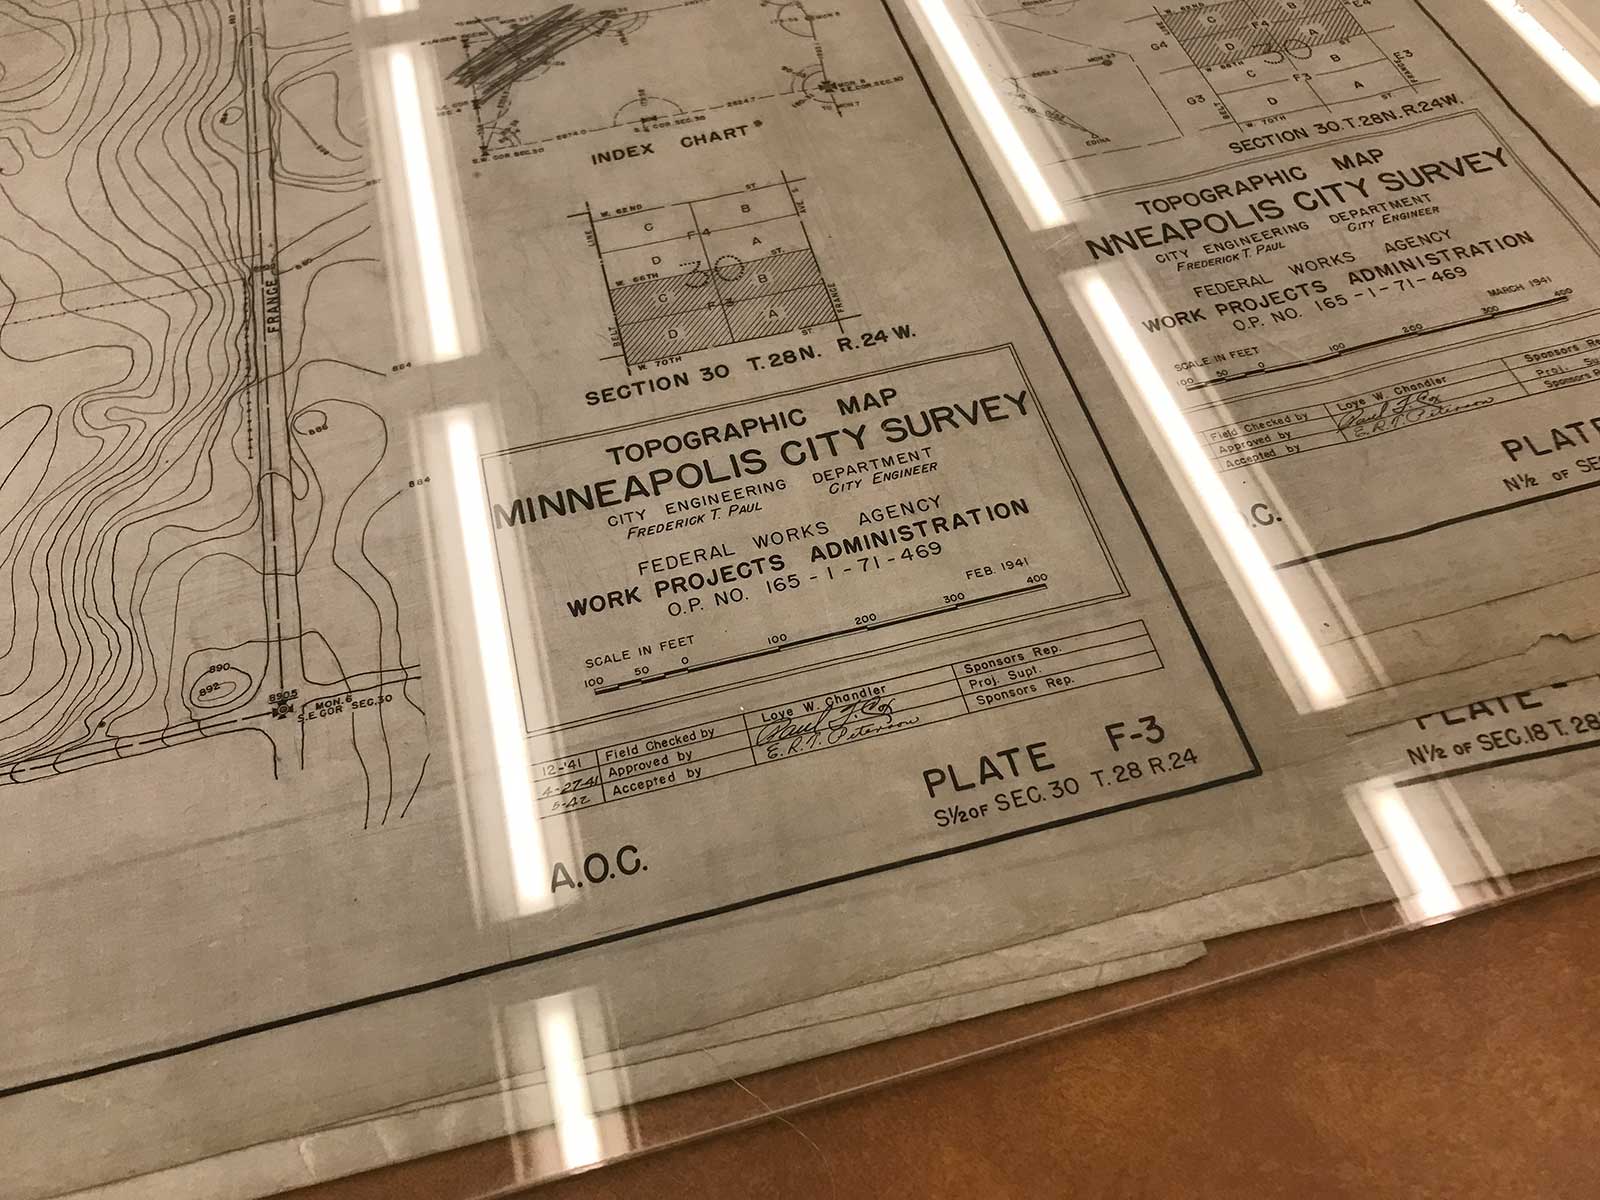 Maps located in the Minneapolis City Hall Clocktower